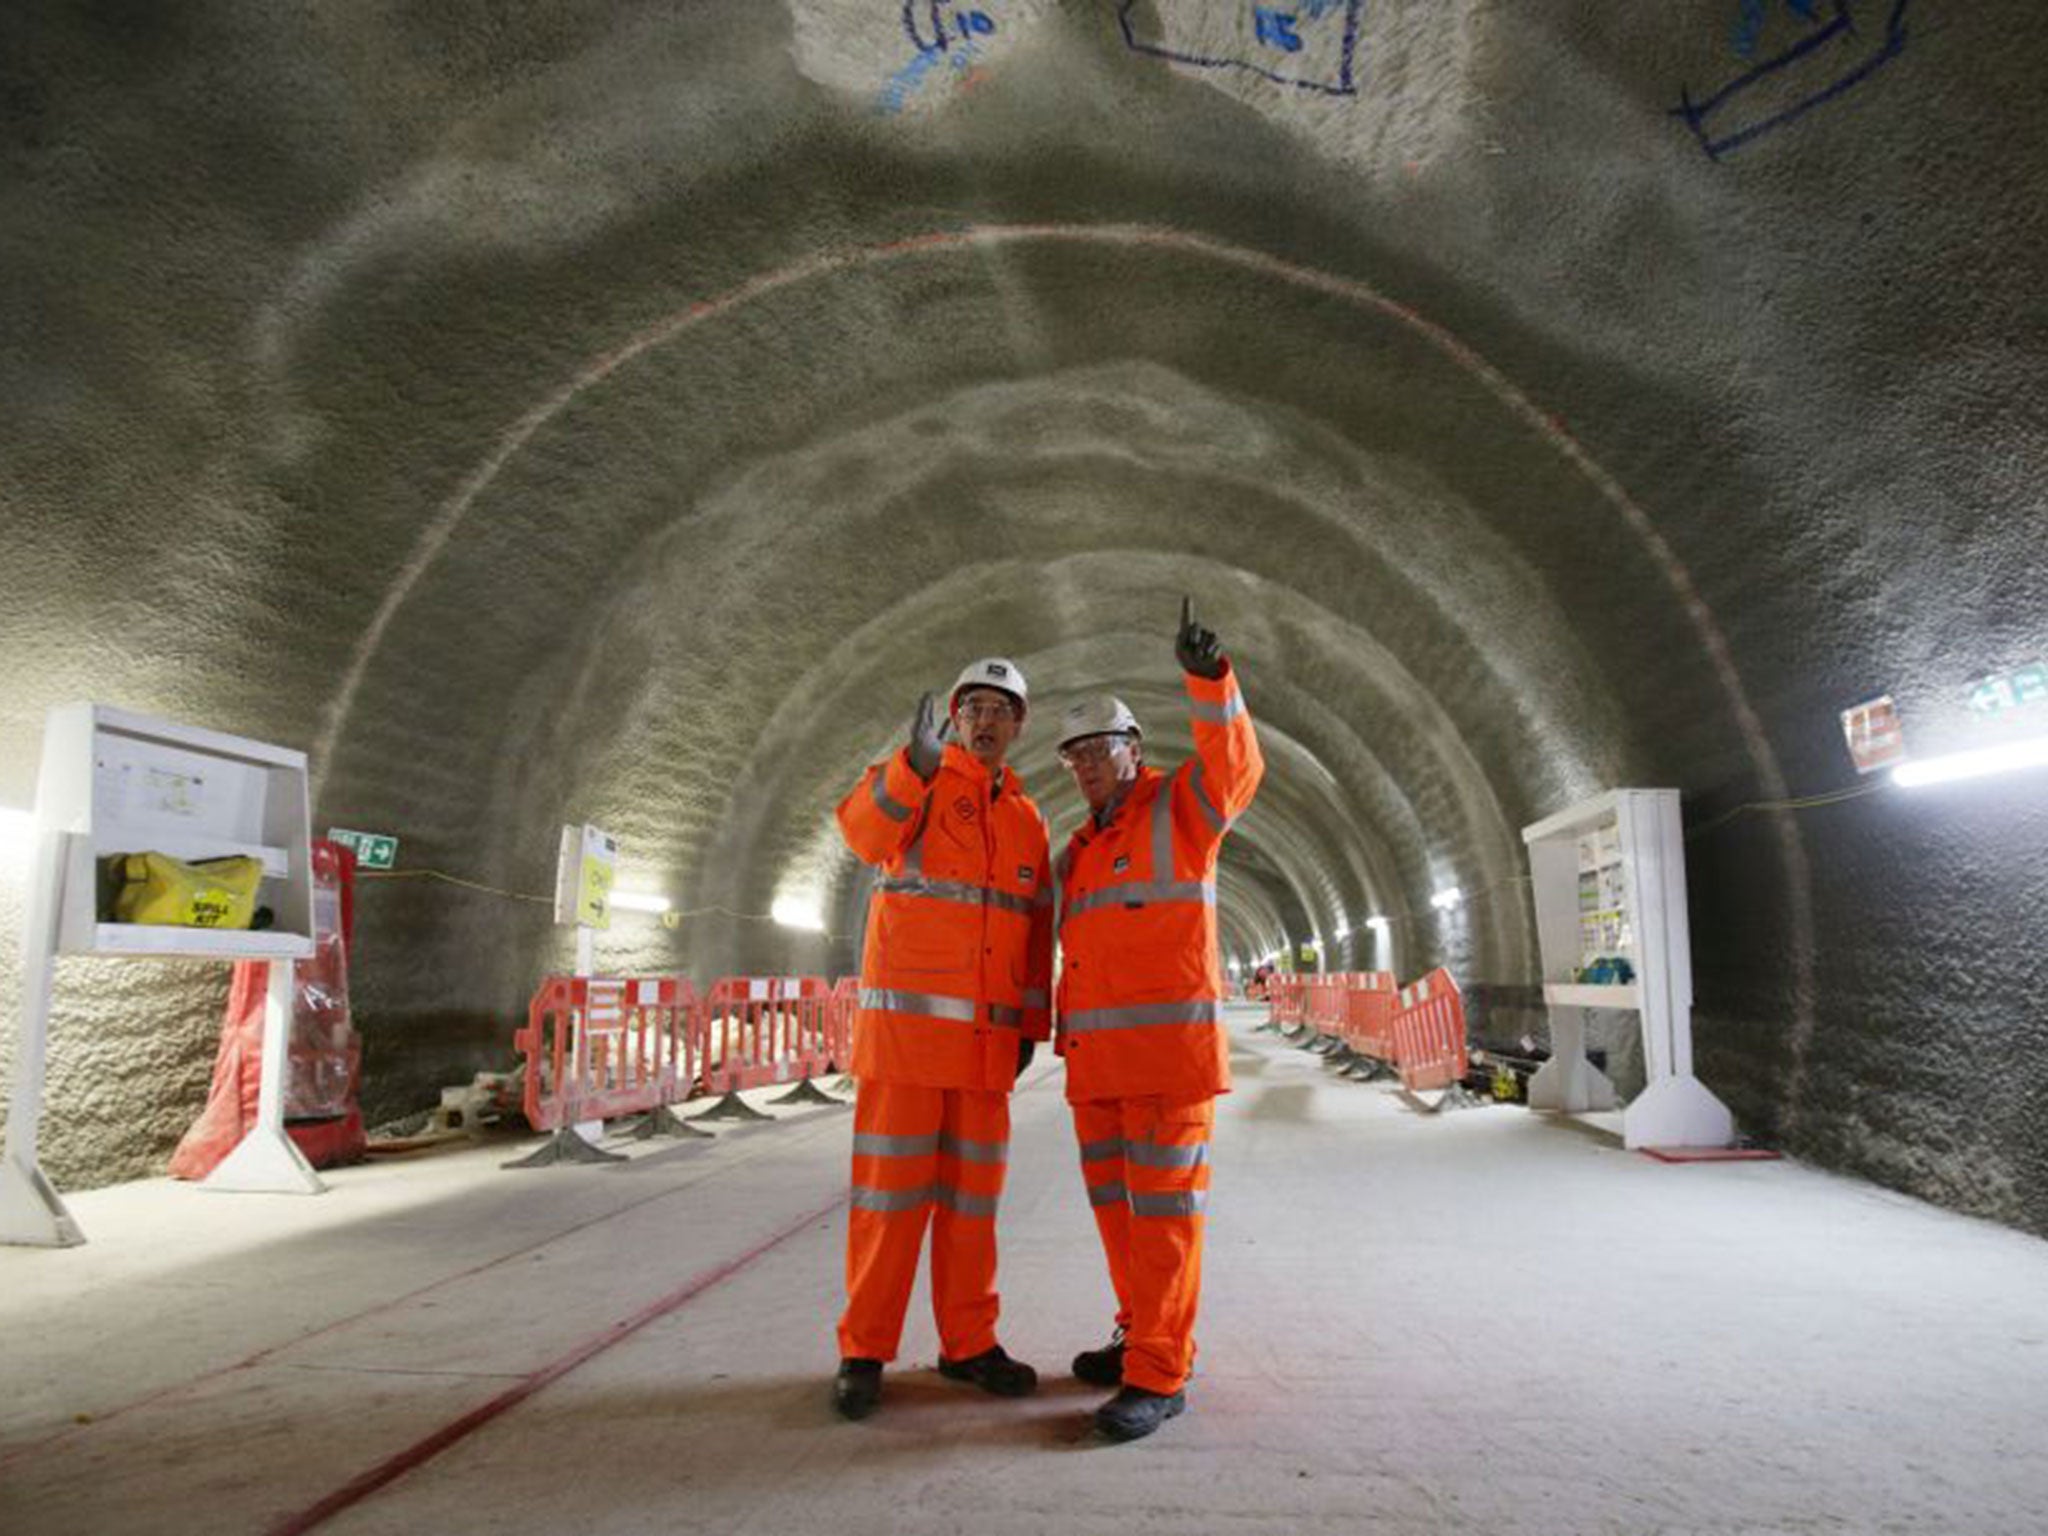 National Infrastructure Commission chairman Lord Adonis, left, during his visit to the site of Tottenham Court Road Crossrail station